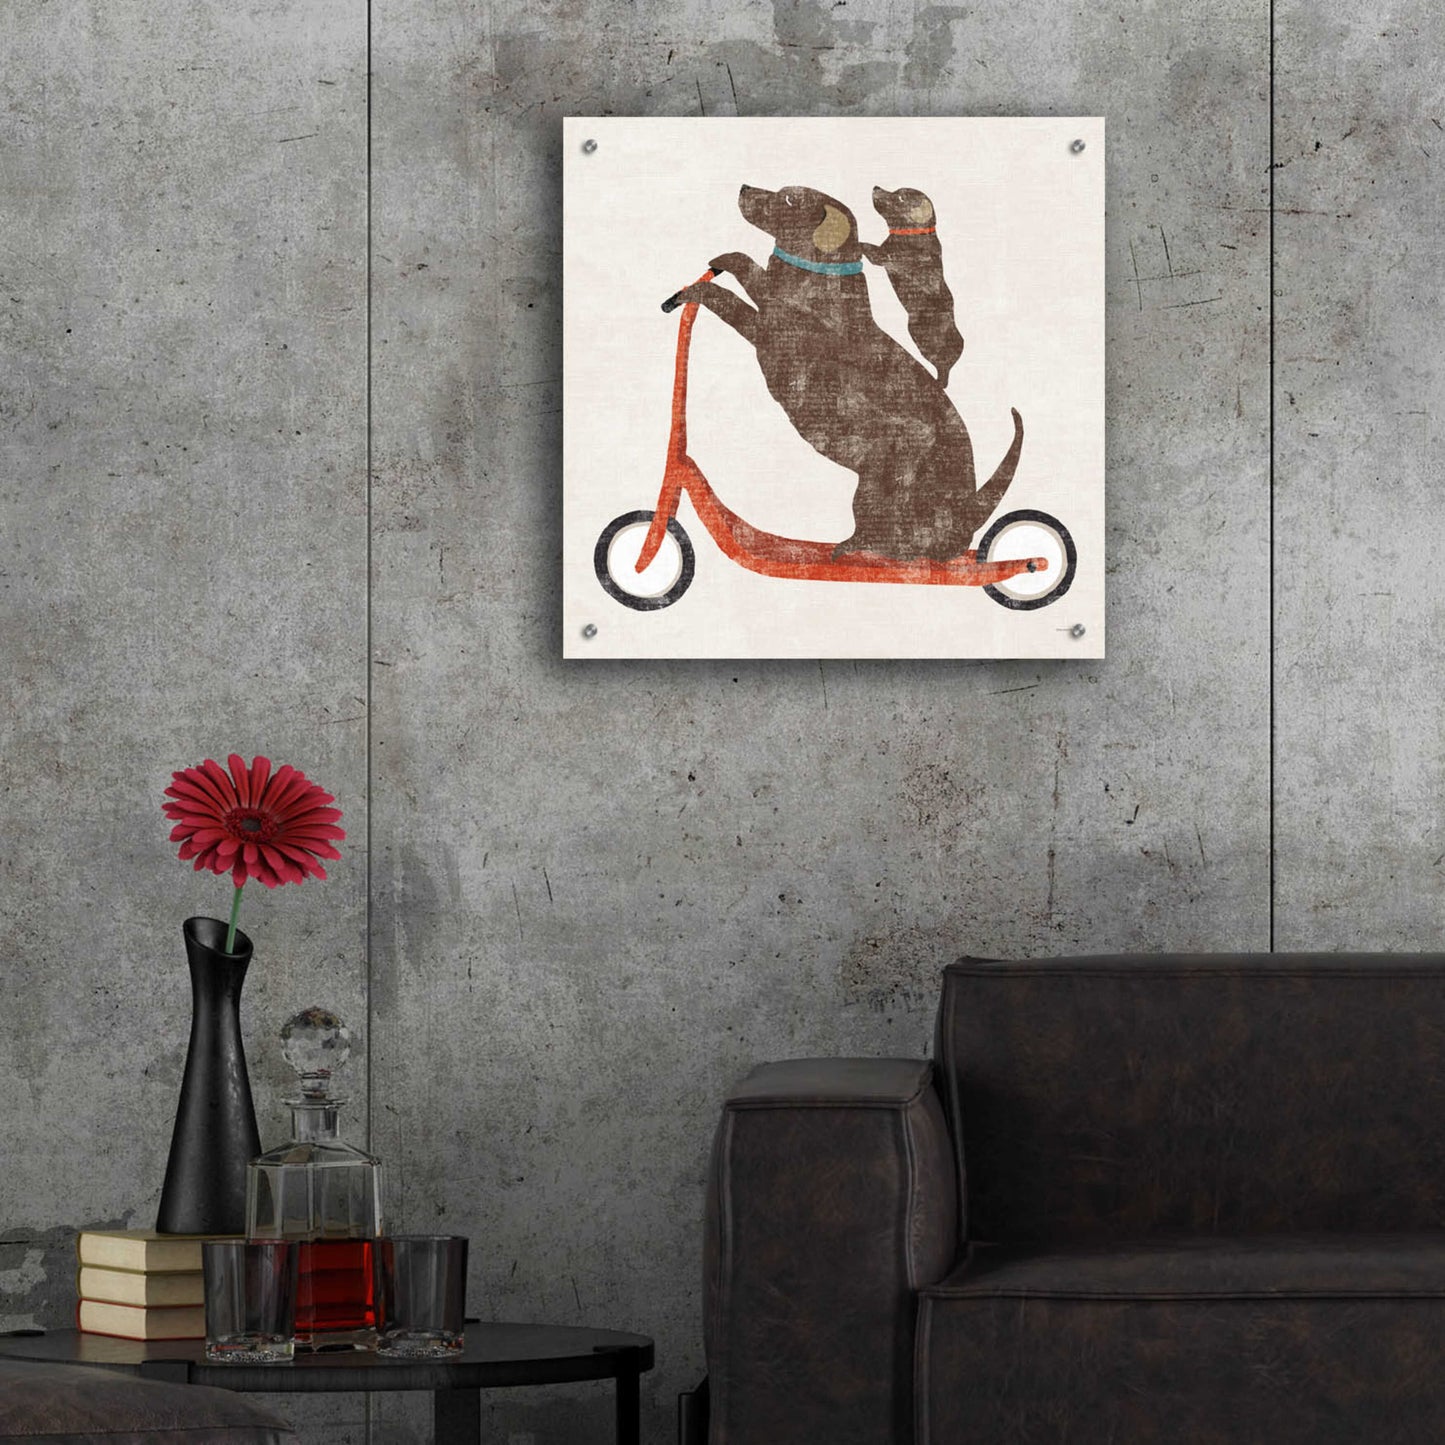 Epic Art 'Lab Scooter Ride' by Sue Schlabach, Acrylic Glass Wall Art,24x24